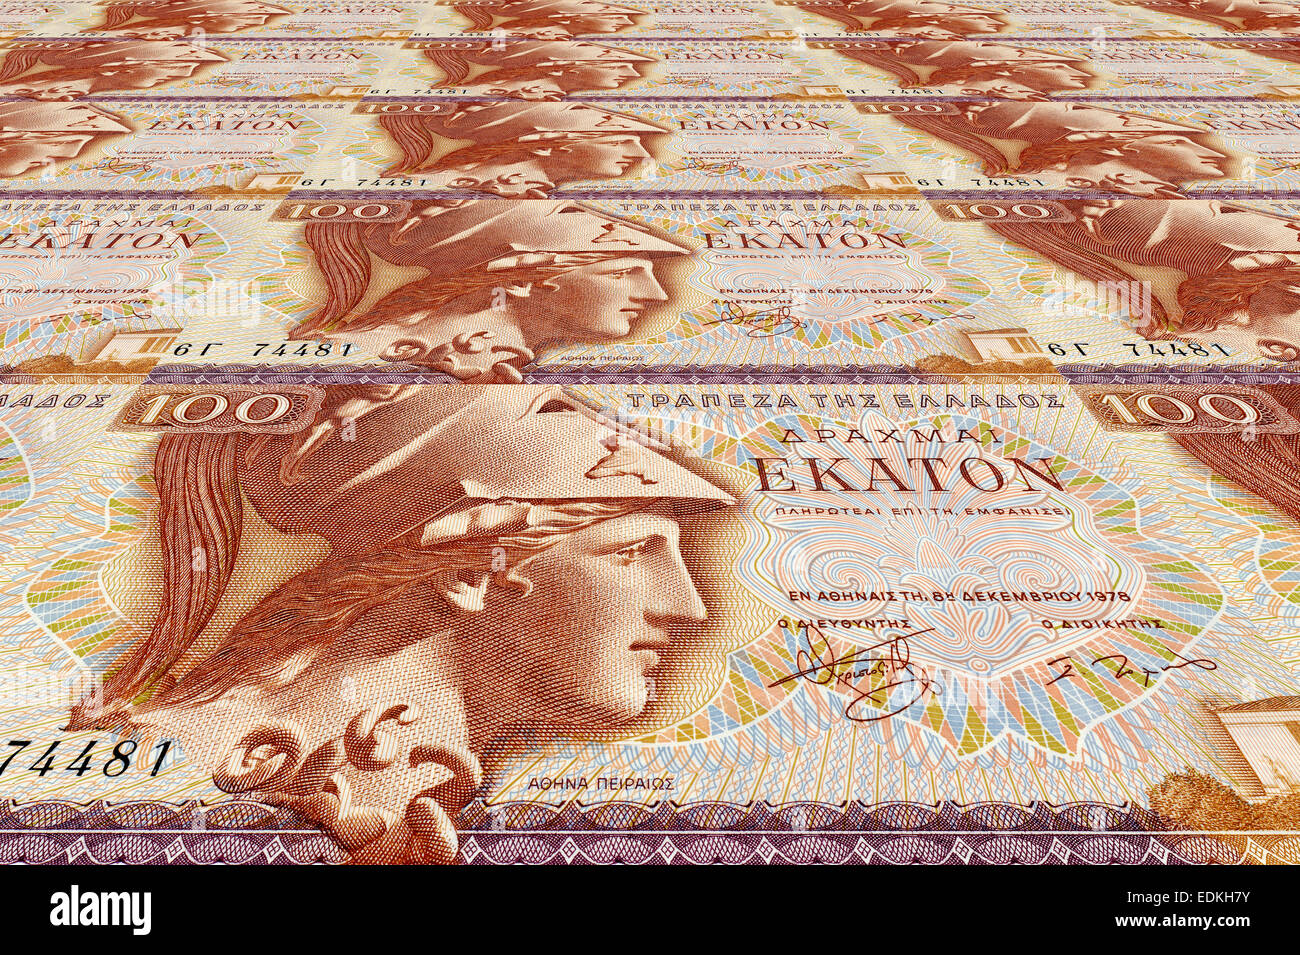 Banknote from Greece, 100 drachmas from 1978 with EU sign, symbolic image Stock Photo